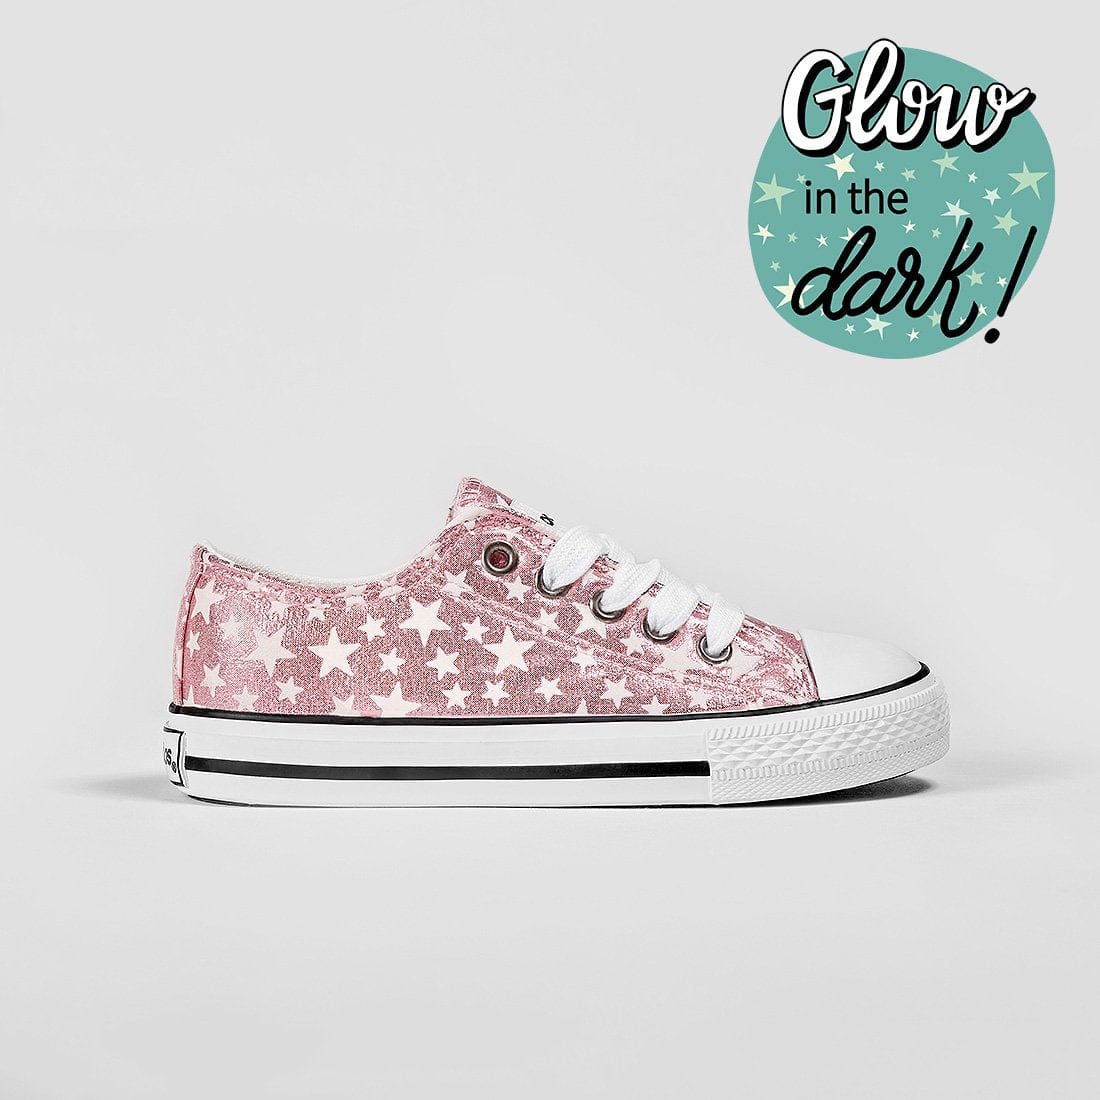 CONGUITOS Shoes Girl's Pink Star Sneakers